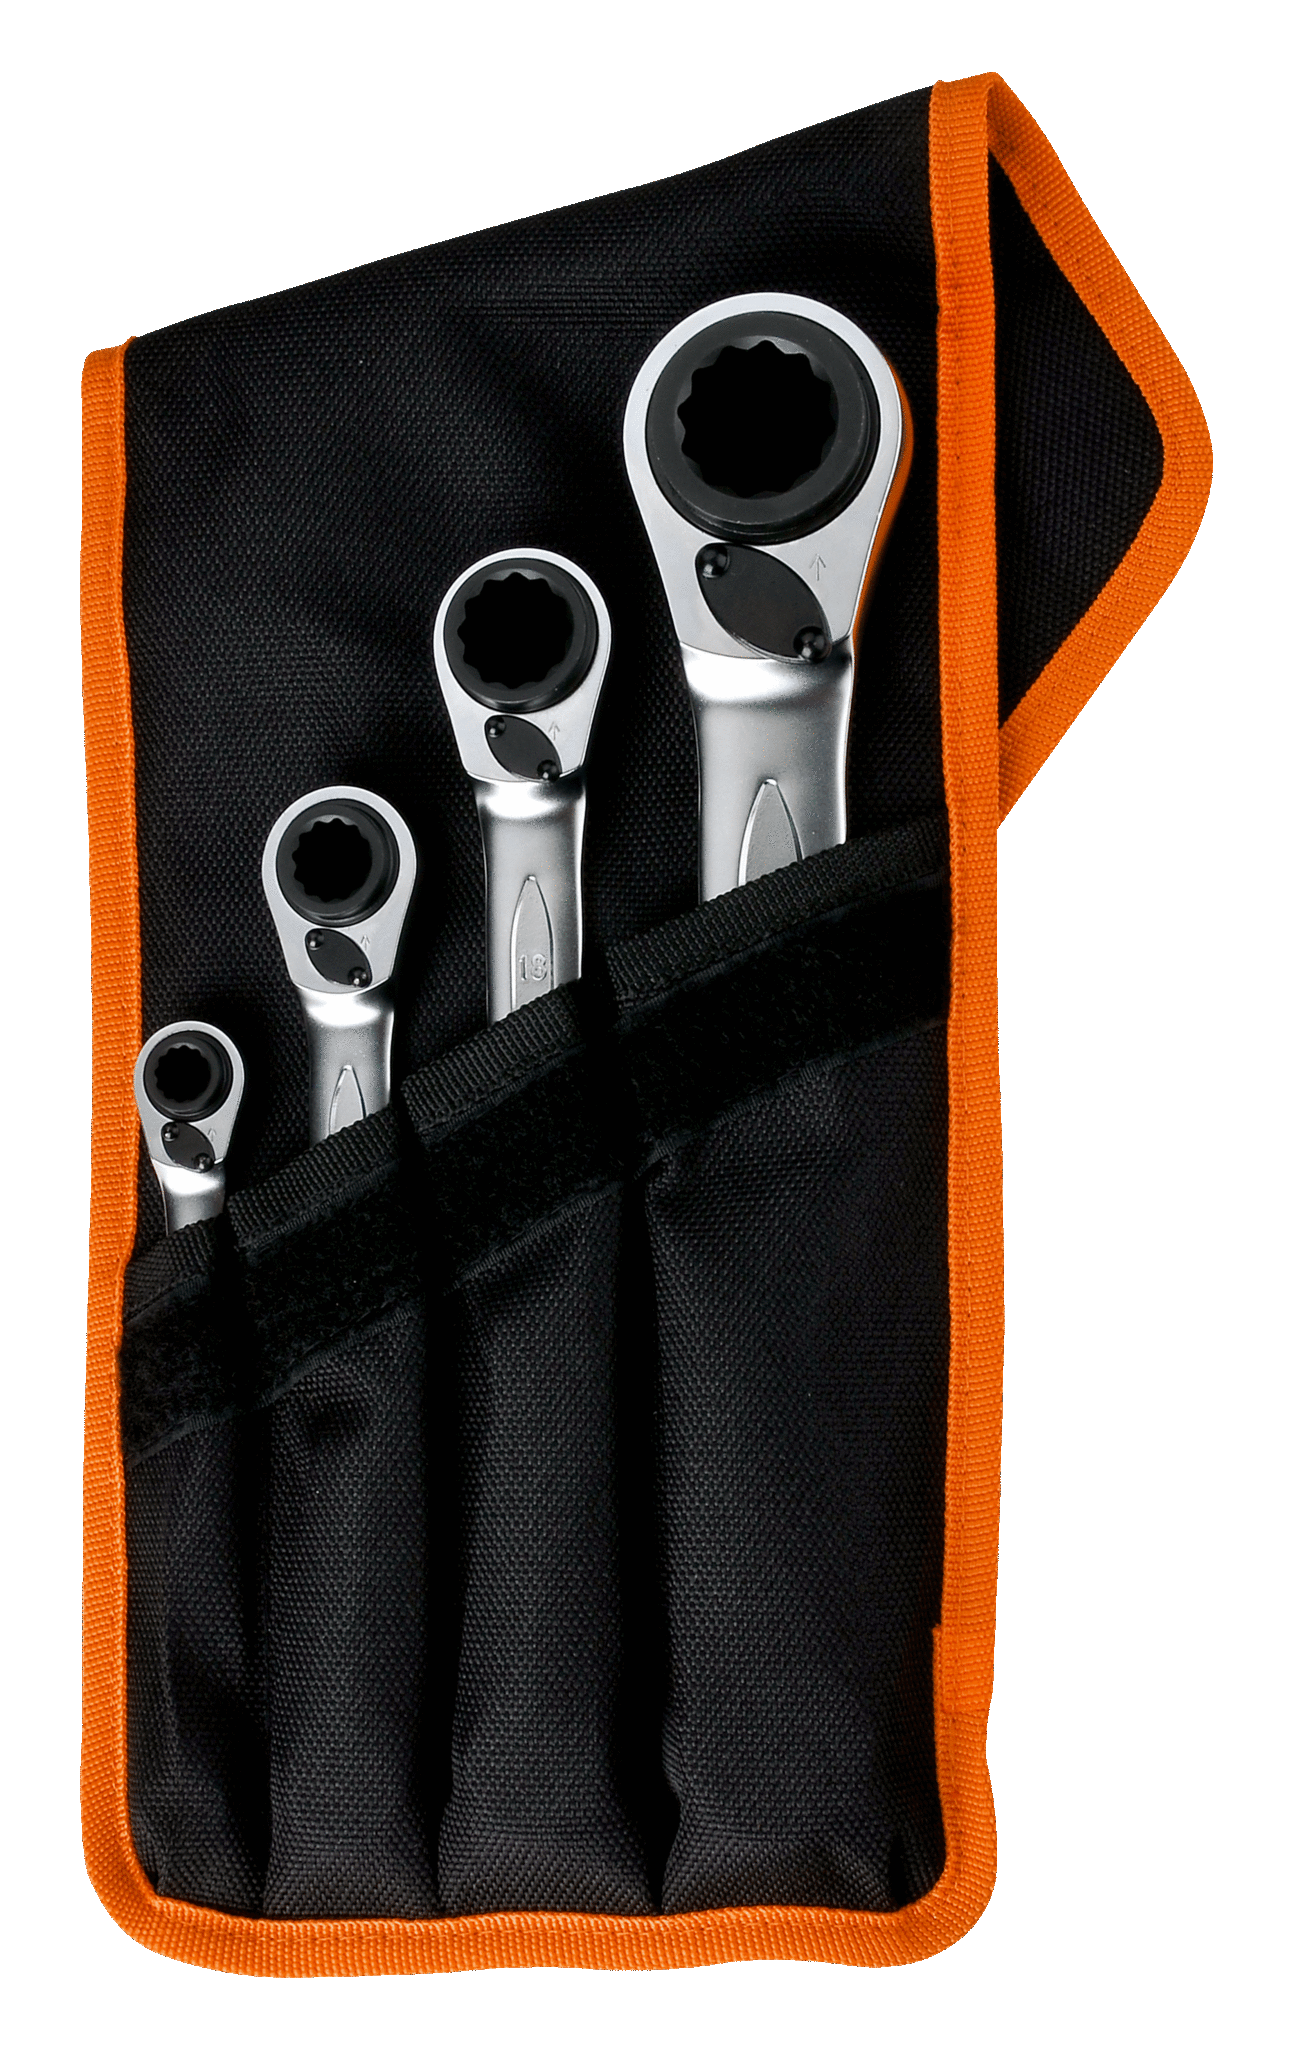 4Pce 4-in-1 Ratcheting Ring Wrench Set S4RM/4T by Bahco